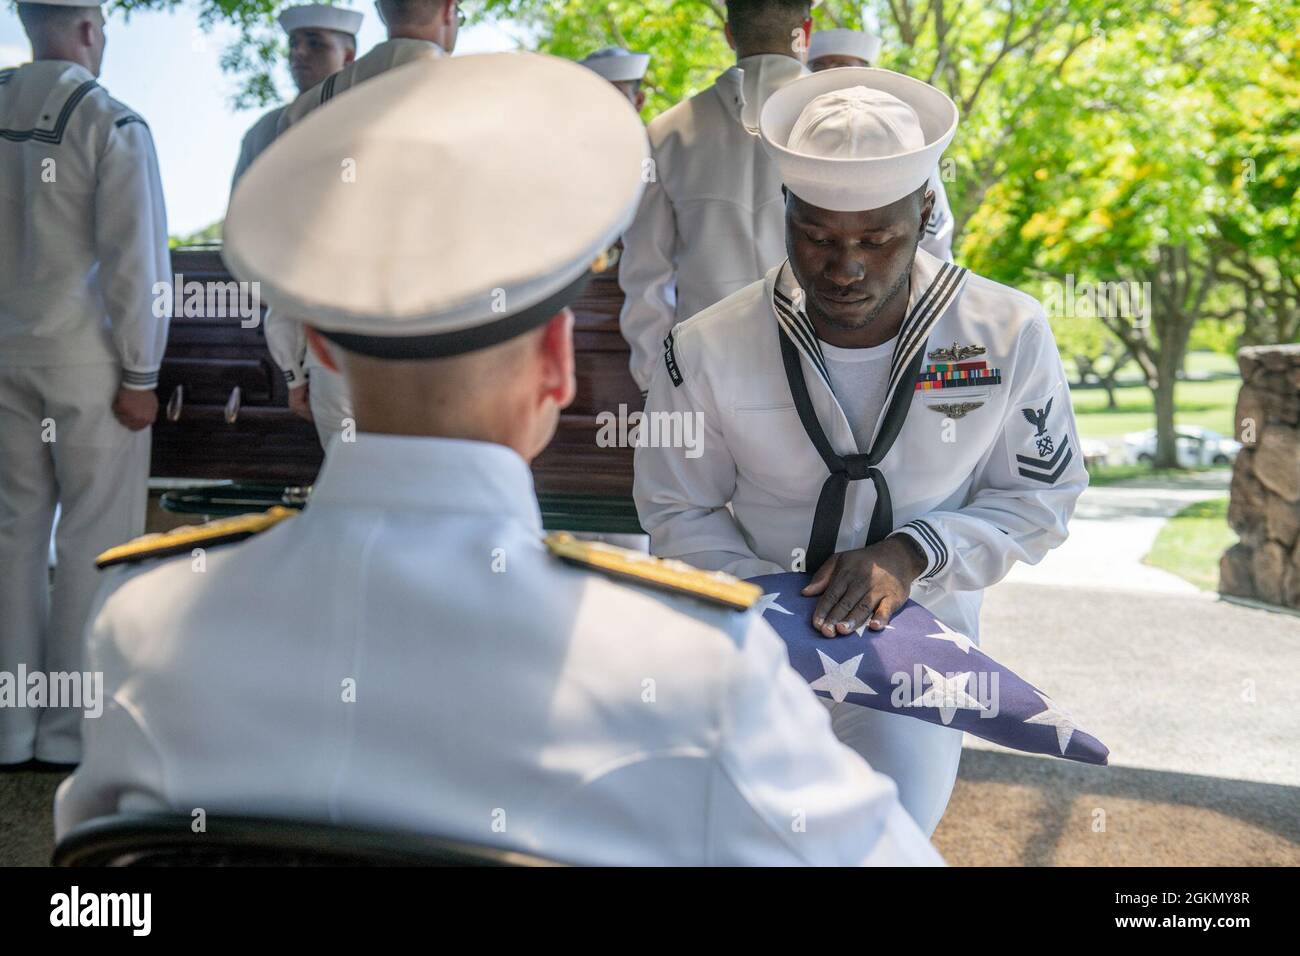 Sailors assigned to Navy Region Hawaii and the Defense POW/MIA Accounting Agency (DPAA) conduct a funeral for U.S. Navy Seaman 1st Class Camillus M. O’Grady, 19, of Greenleaf, Kansas, at the National Memorial Cemetery of the Pacific, Honolulu, Hawaii, June 1, 2021. O’Grady was assigned to the USS Oklahoma which sustained fire from Japanese aircraft and multiple torpedo hits causing the ship to capsize and resulted in the deaths of more than 400 crew members on Dec. 7, 1941, at Ford Island, Pearl Harbor. O’Grady was recently identified through DNA analysis by the DPAA forensic laboratory and la Stock Photo